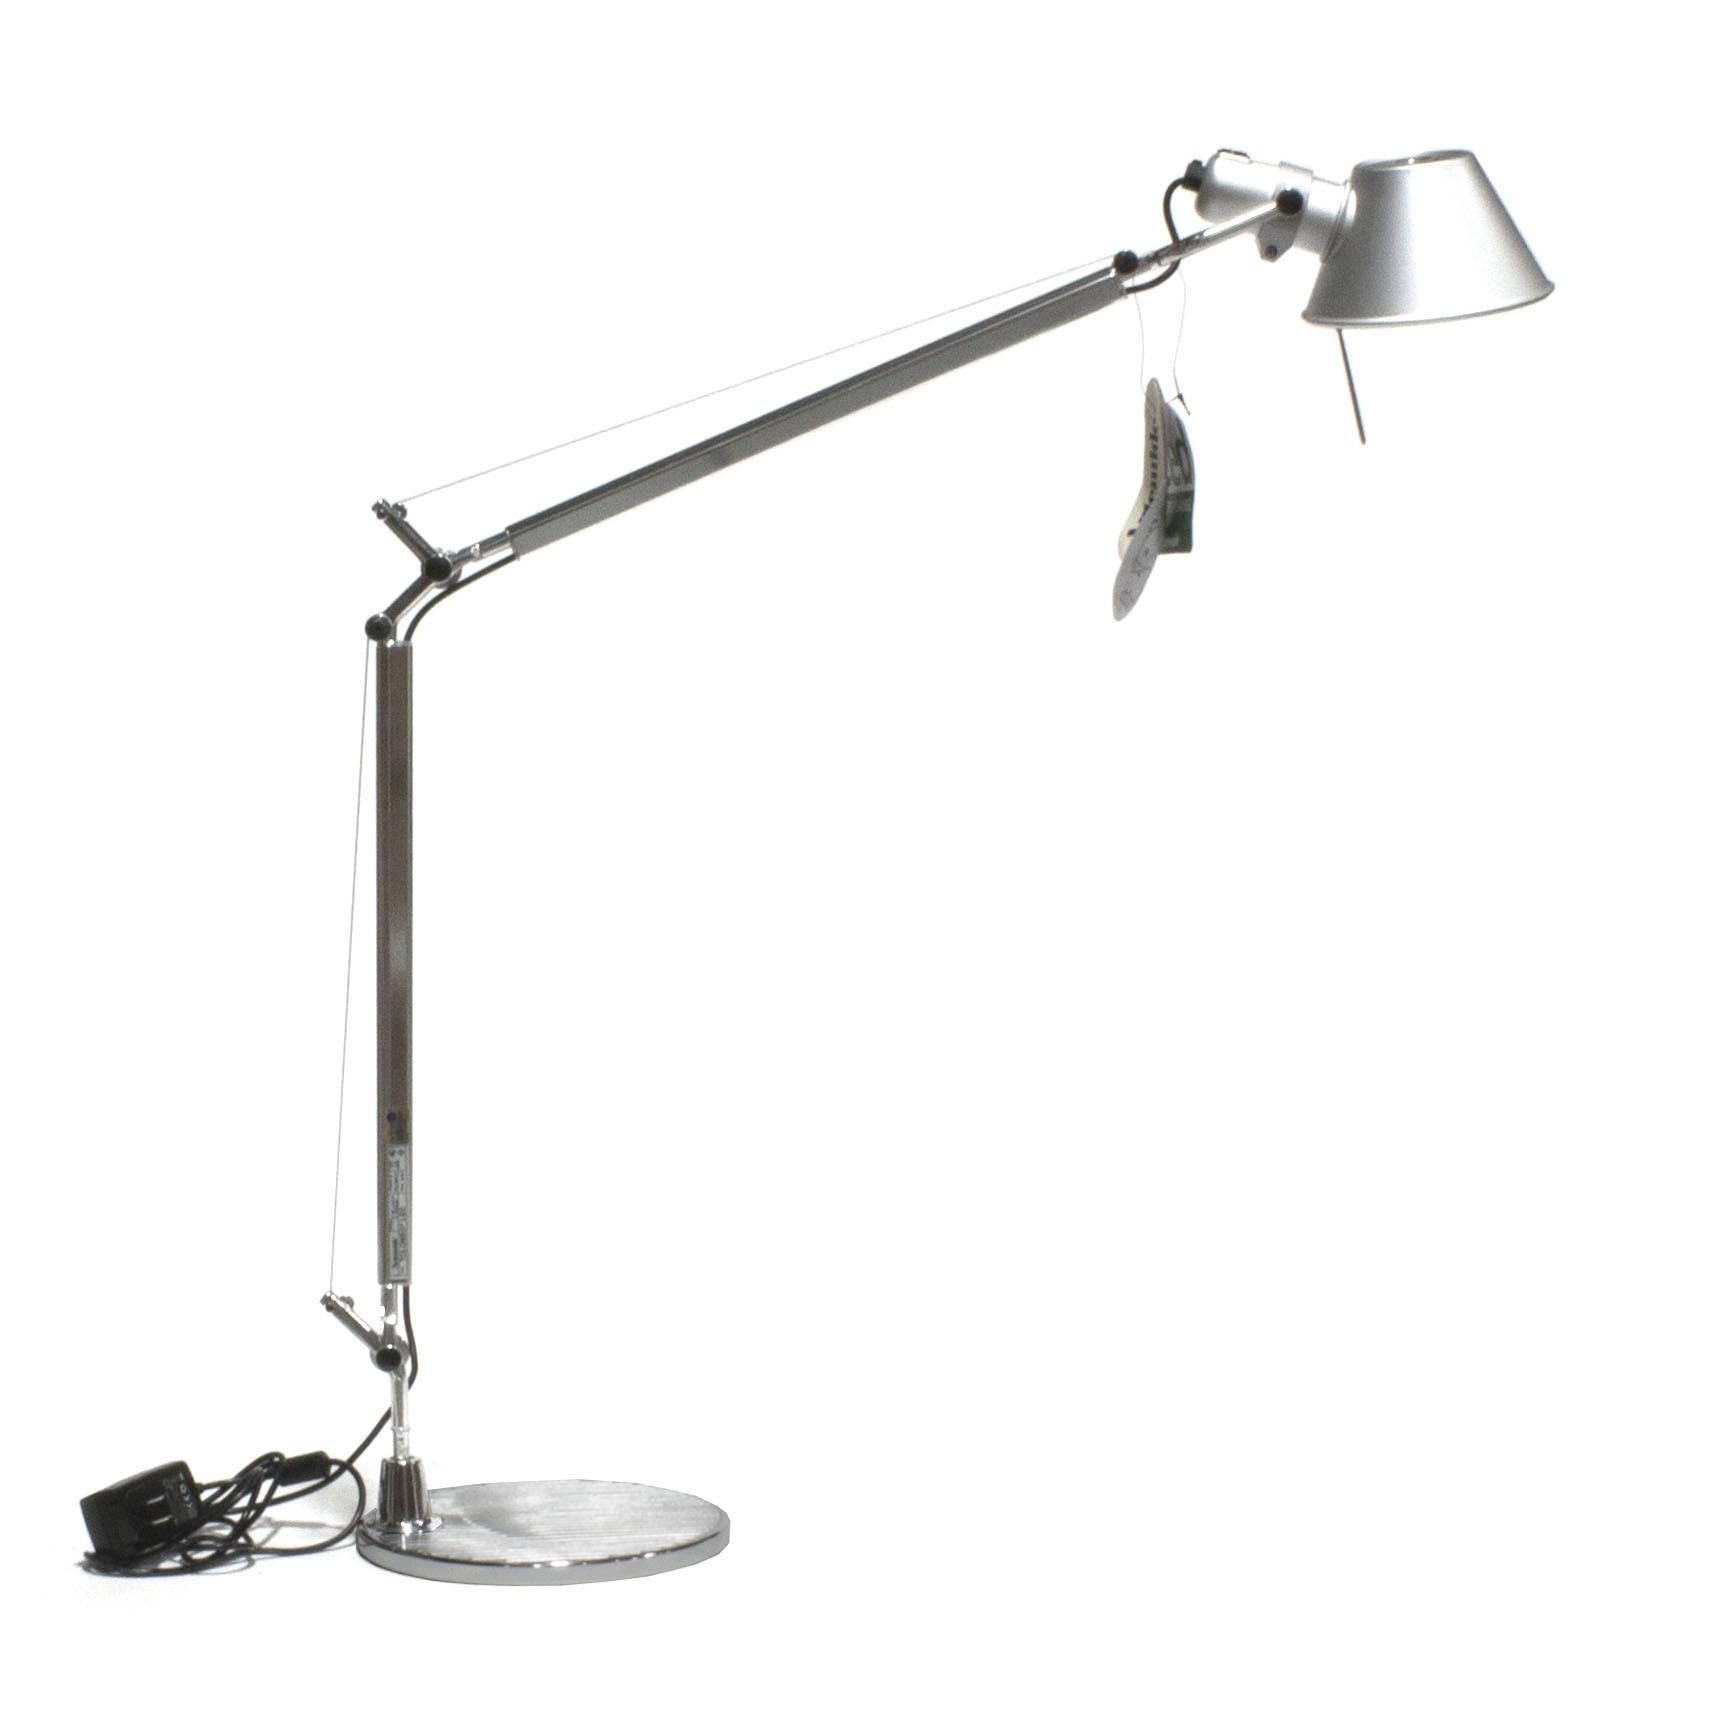 Michele De Lucchi's design work spans many disciplines from lighting, architecture, Industrial design, to lap tops. Of all his designs, the Tolomeo stands as one of his greatest designs. In 1989 it was awarded the Compasso d'Oro for its achievements